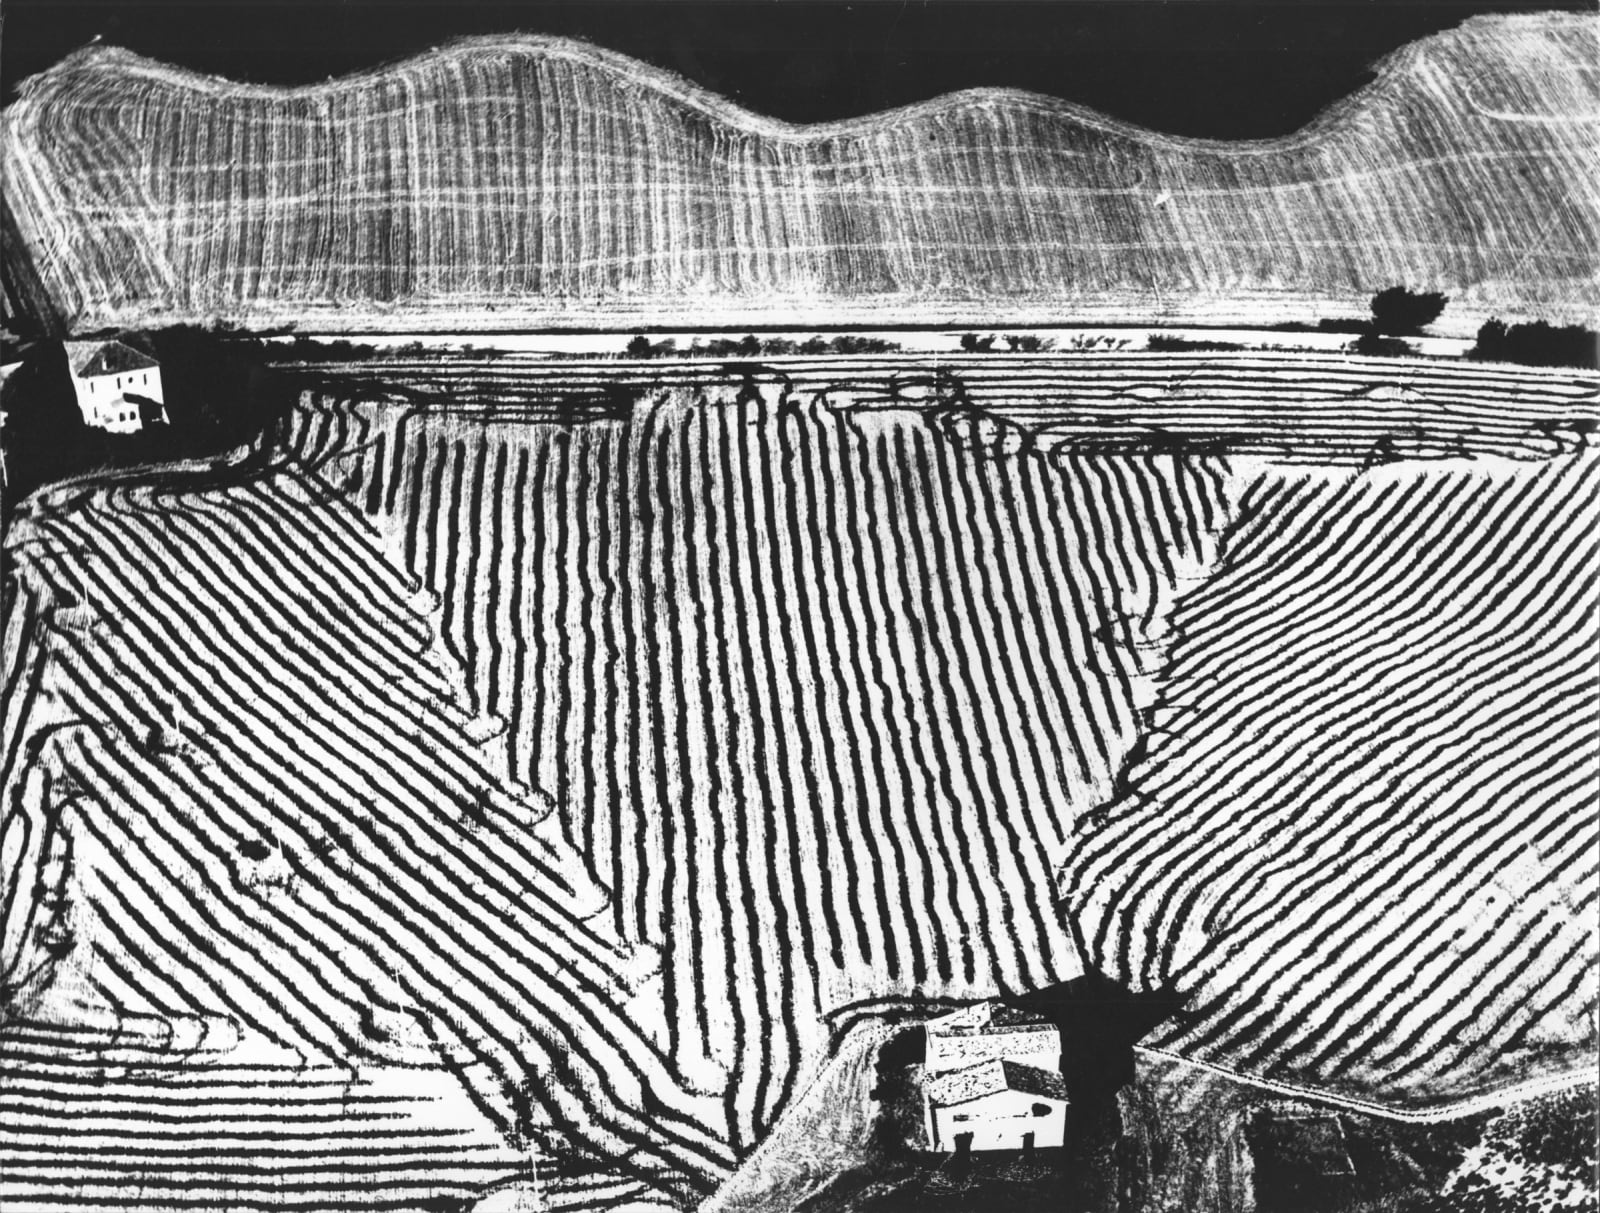 Mario Giacomelli, Paesaggio 288 (from the series On Being Aware of Nature), c. 1970